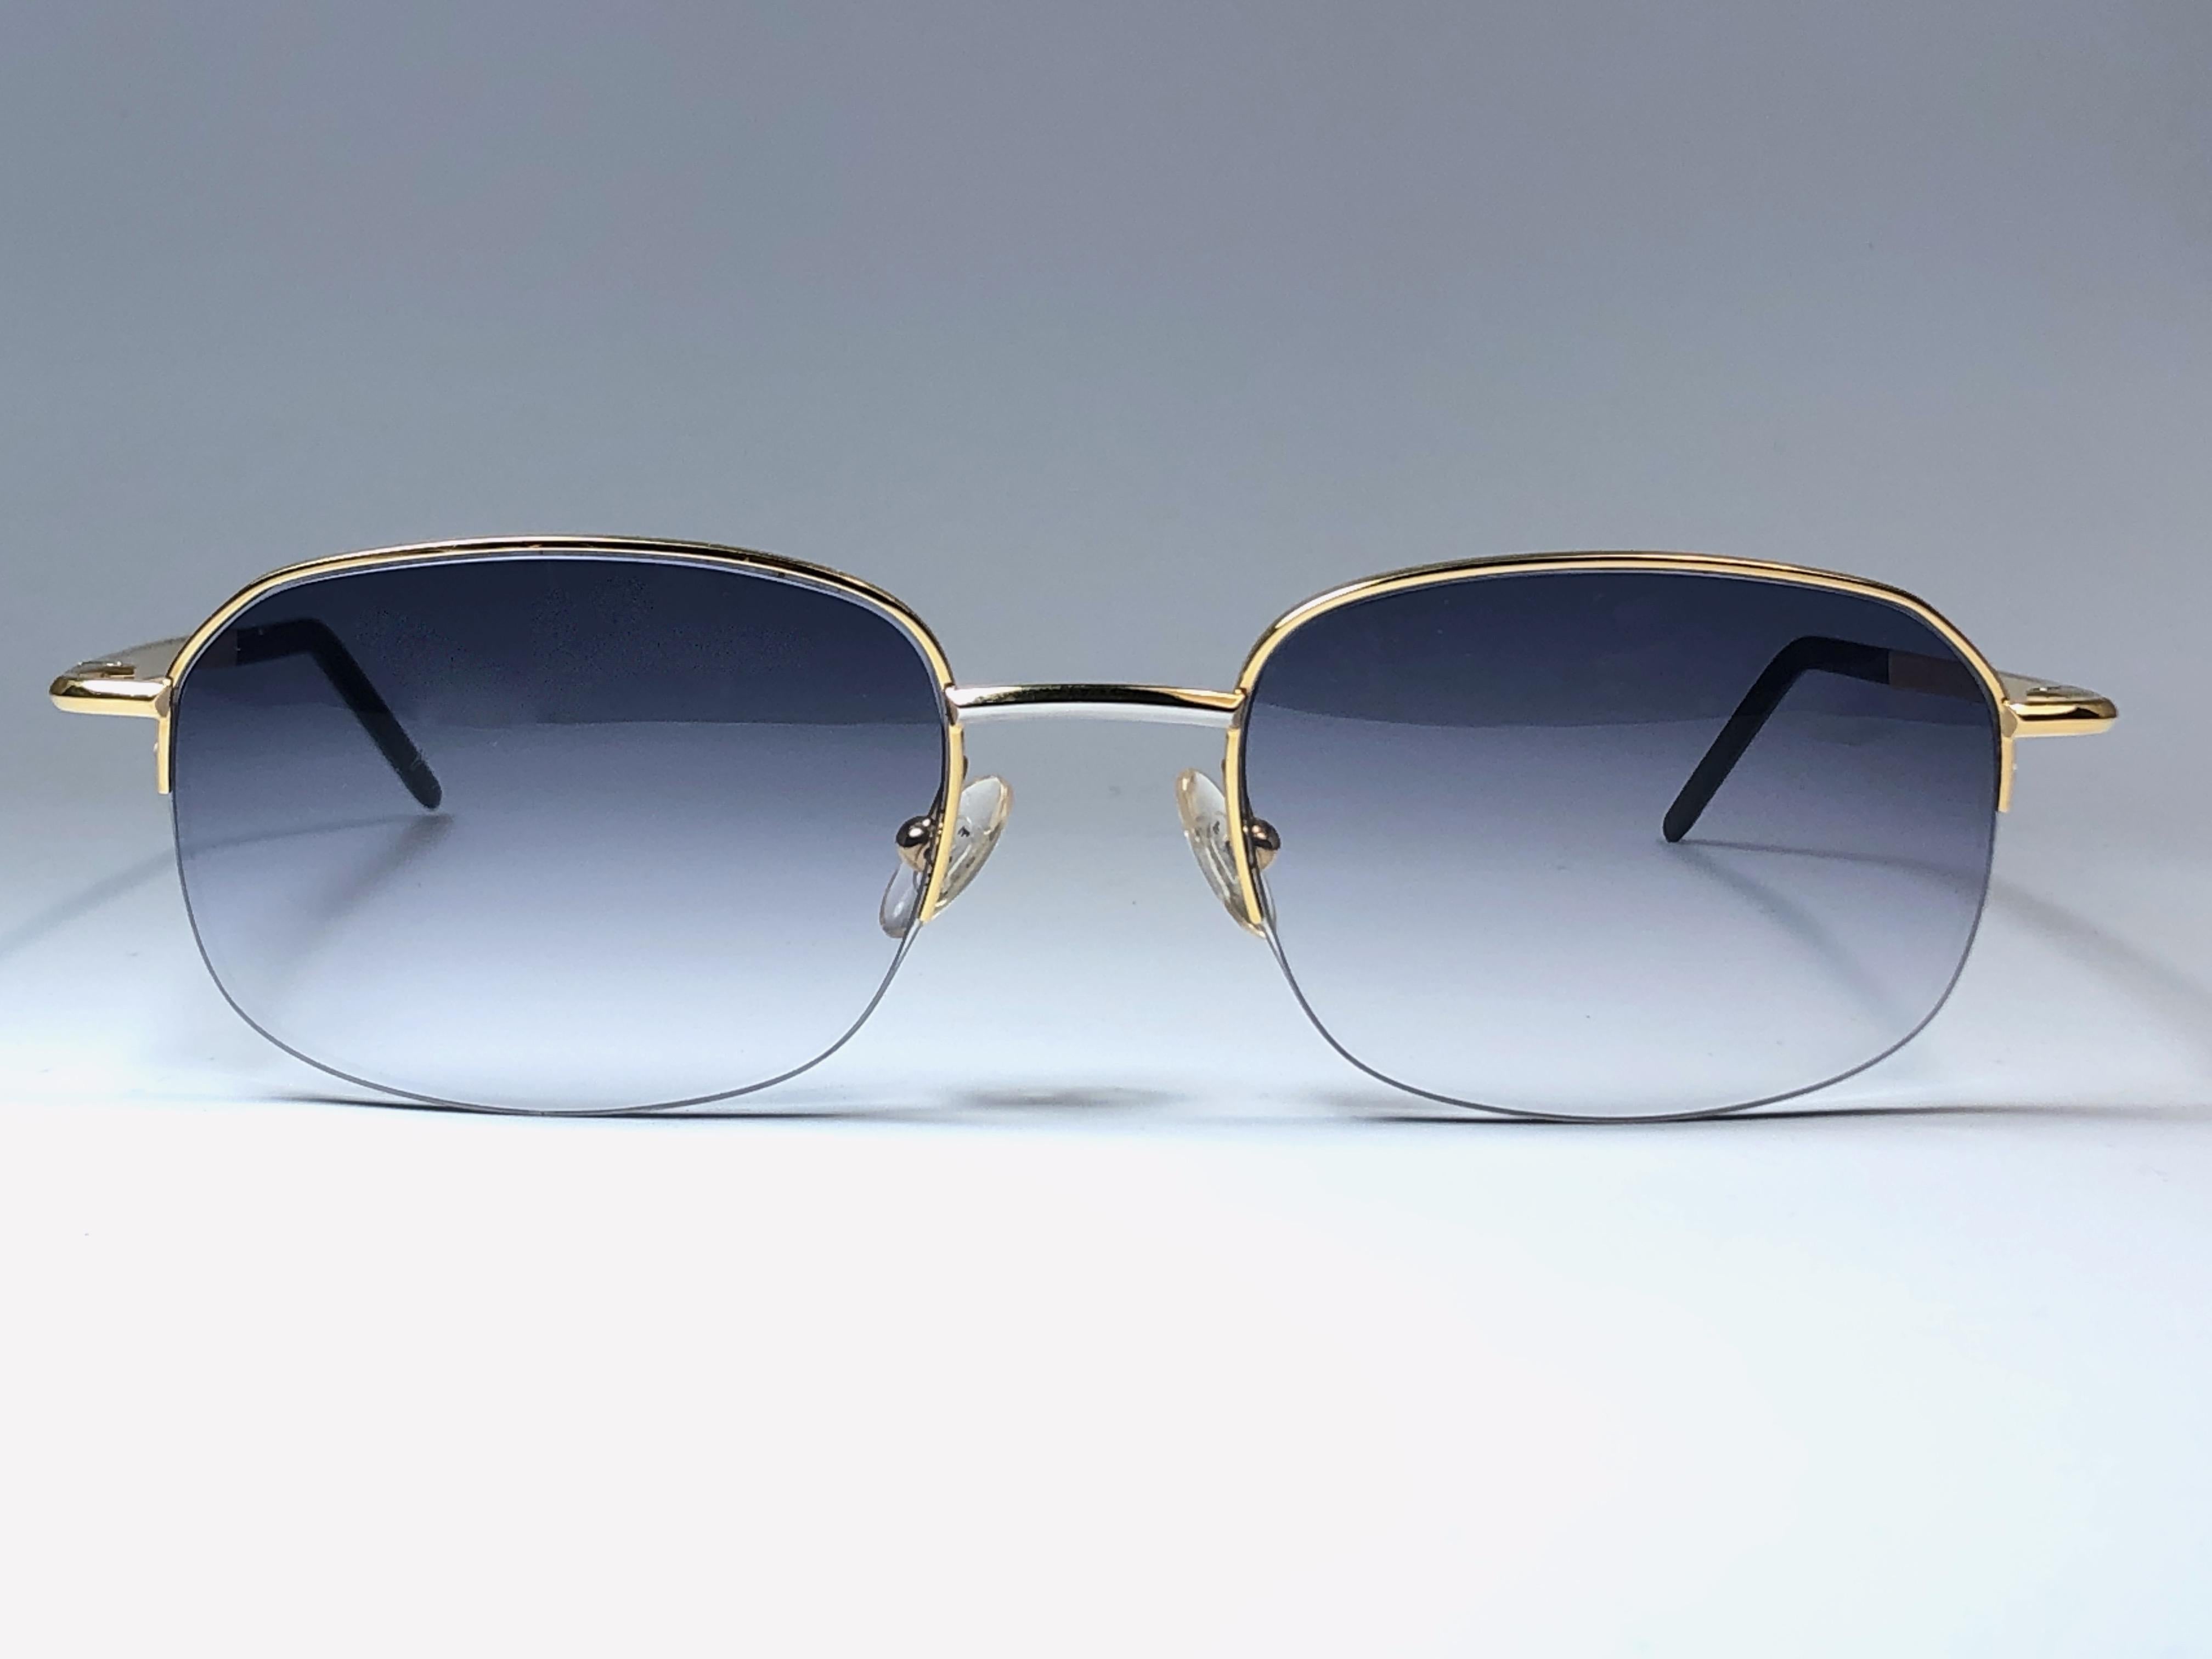 Mint Vintage FRED gold half frame. Spotless blue gradient lenses.

Made in France.
 
Produced and design in 1990's.

This item may show minor sign of wear due to storage. 